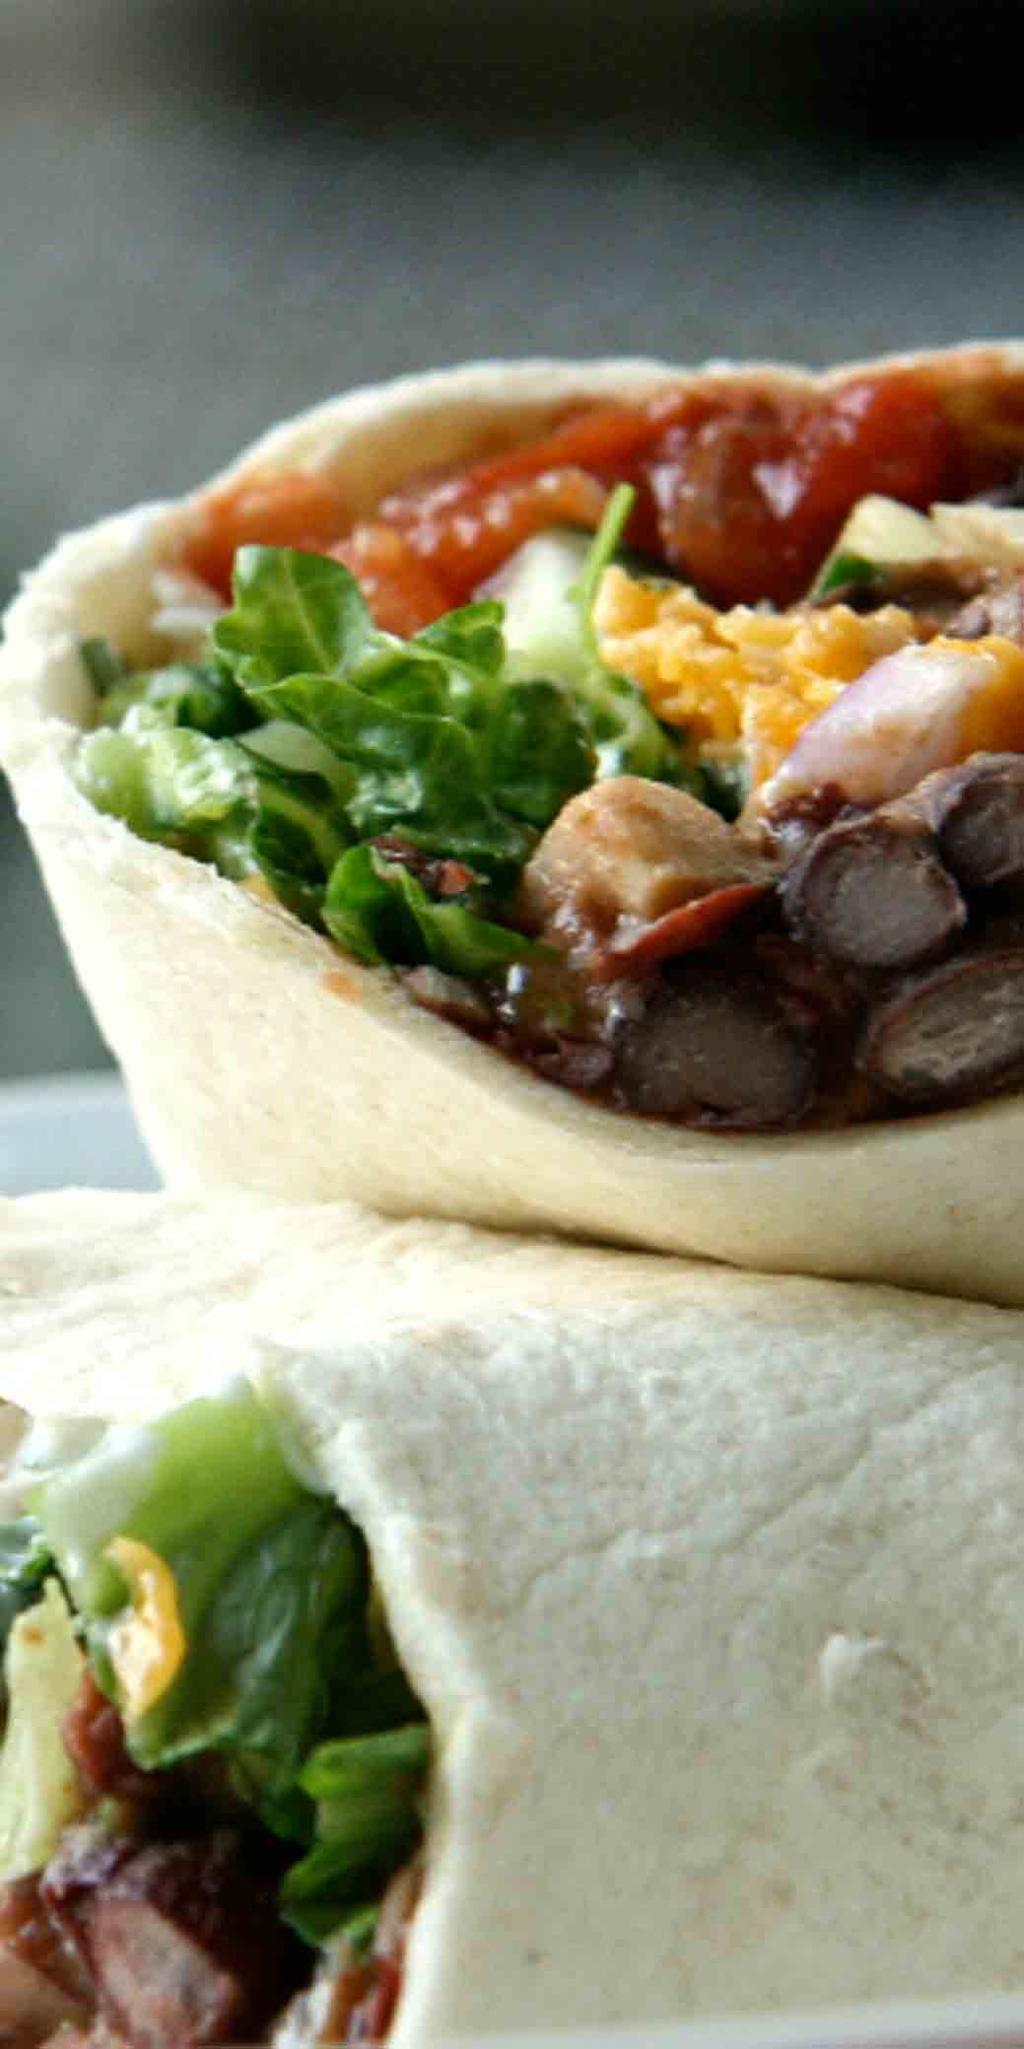 BEAN BURRITO 300g tin tomatoes ¼ red capsicum, diced A pinch each of cumin powder, chilli powder and paprika 1 ¼ teaspoon tomato paste 250g red kidney beans drained and washed A pinch of salt and